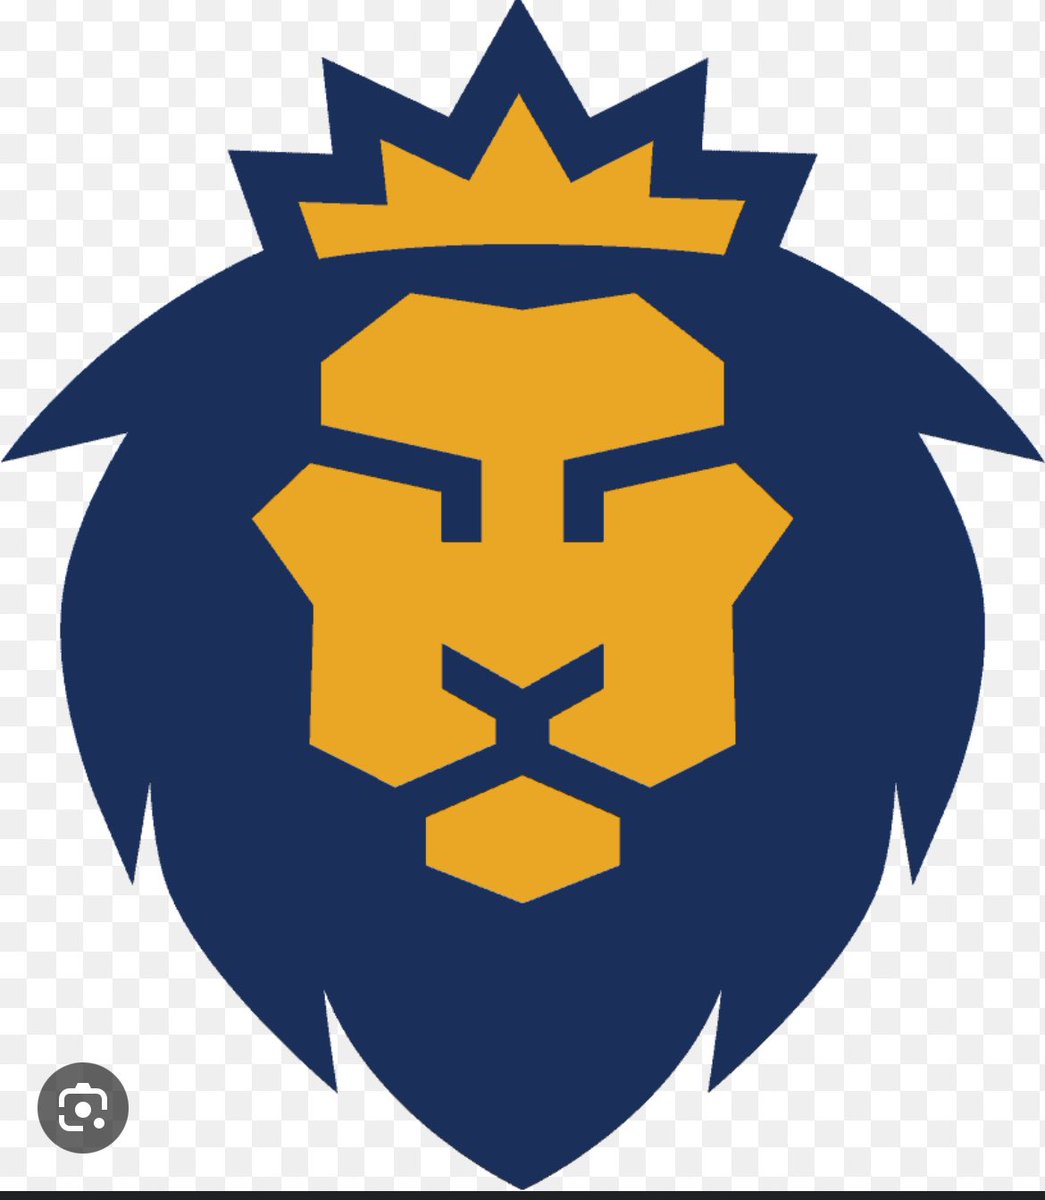 Blessed to receive an offer from Warner university #AGTG @SnapWoodDLegend @COACH217ROLAND